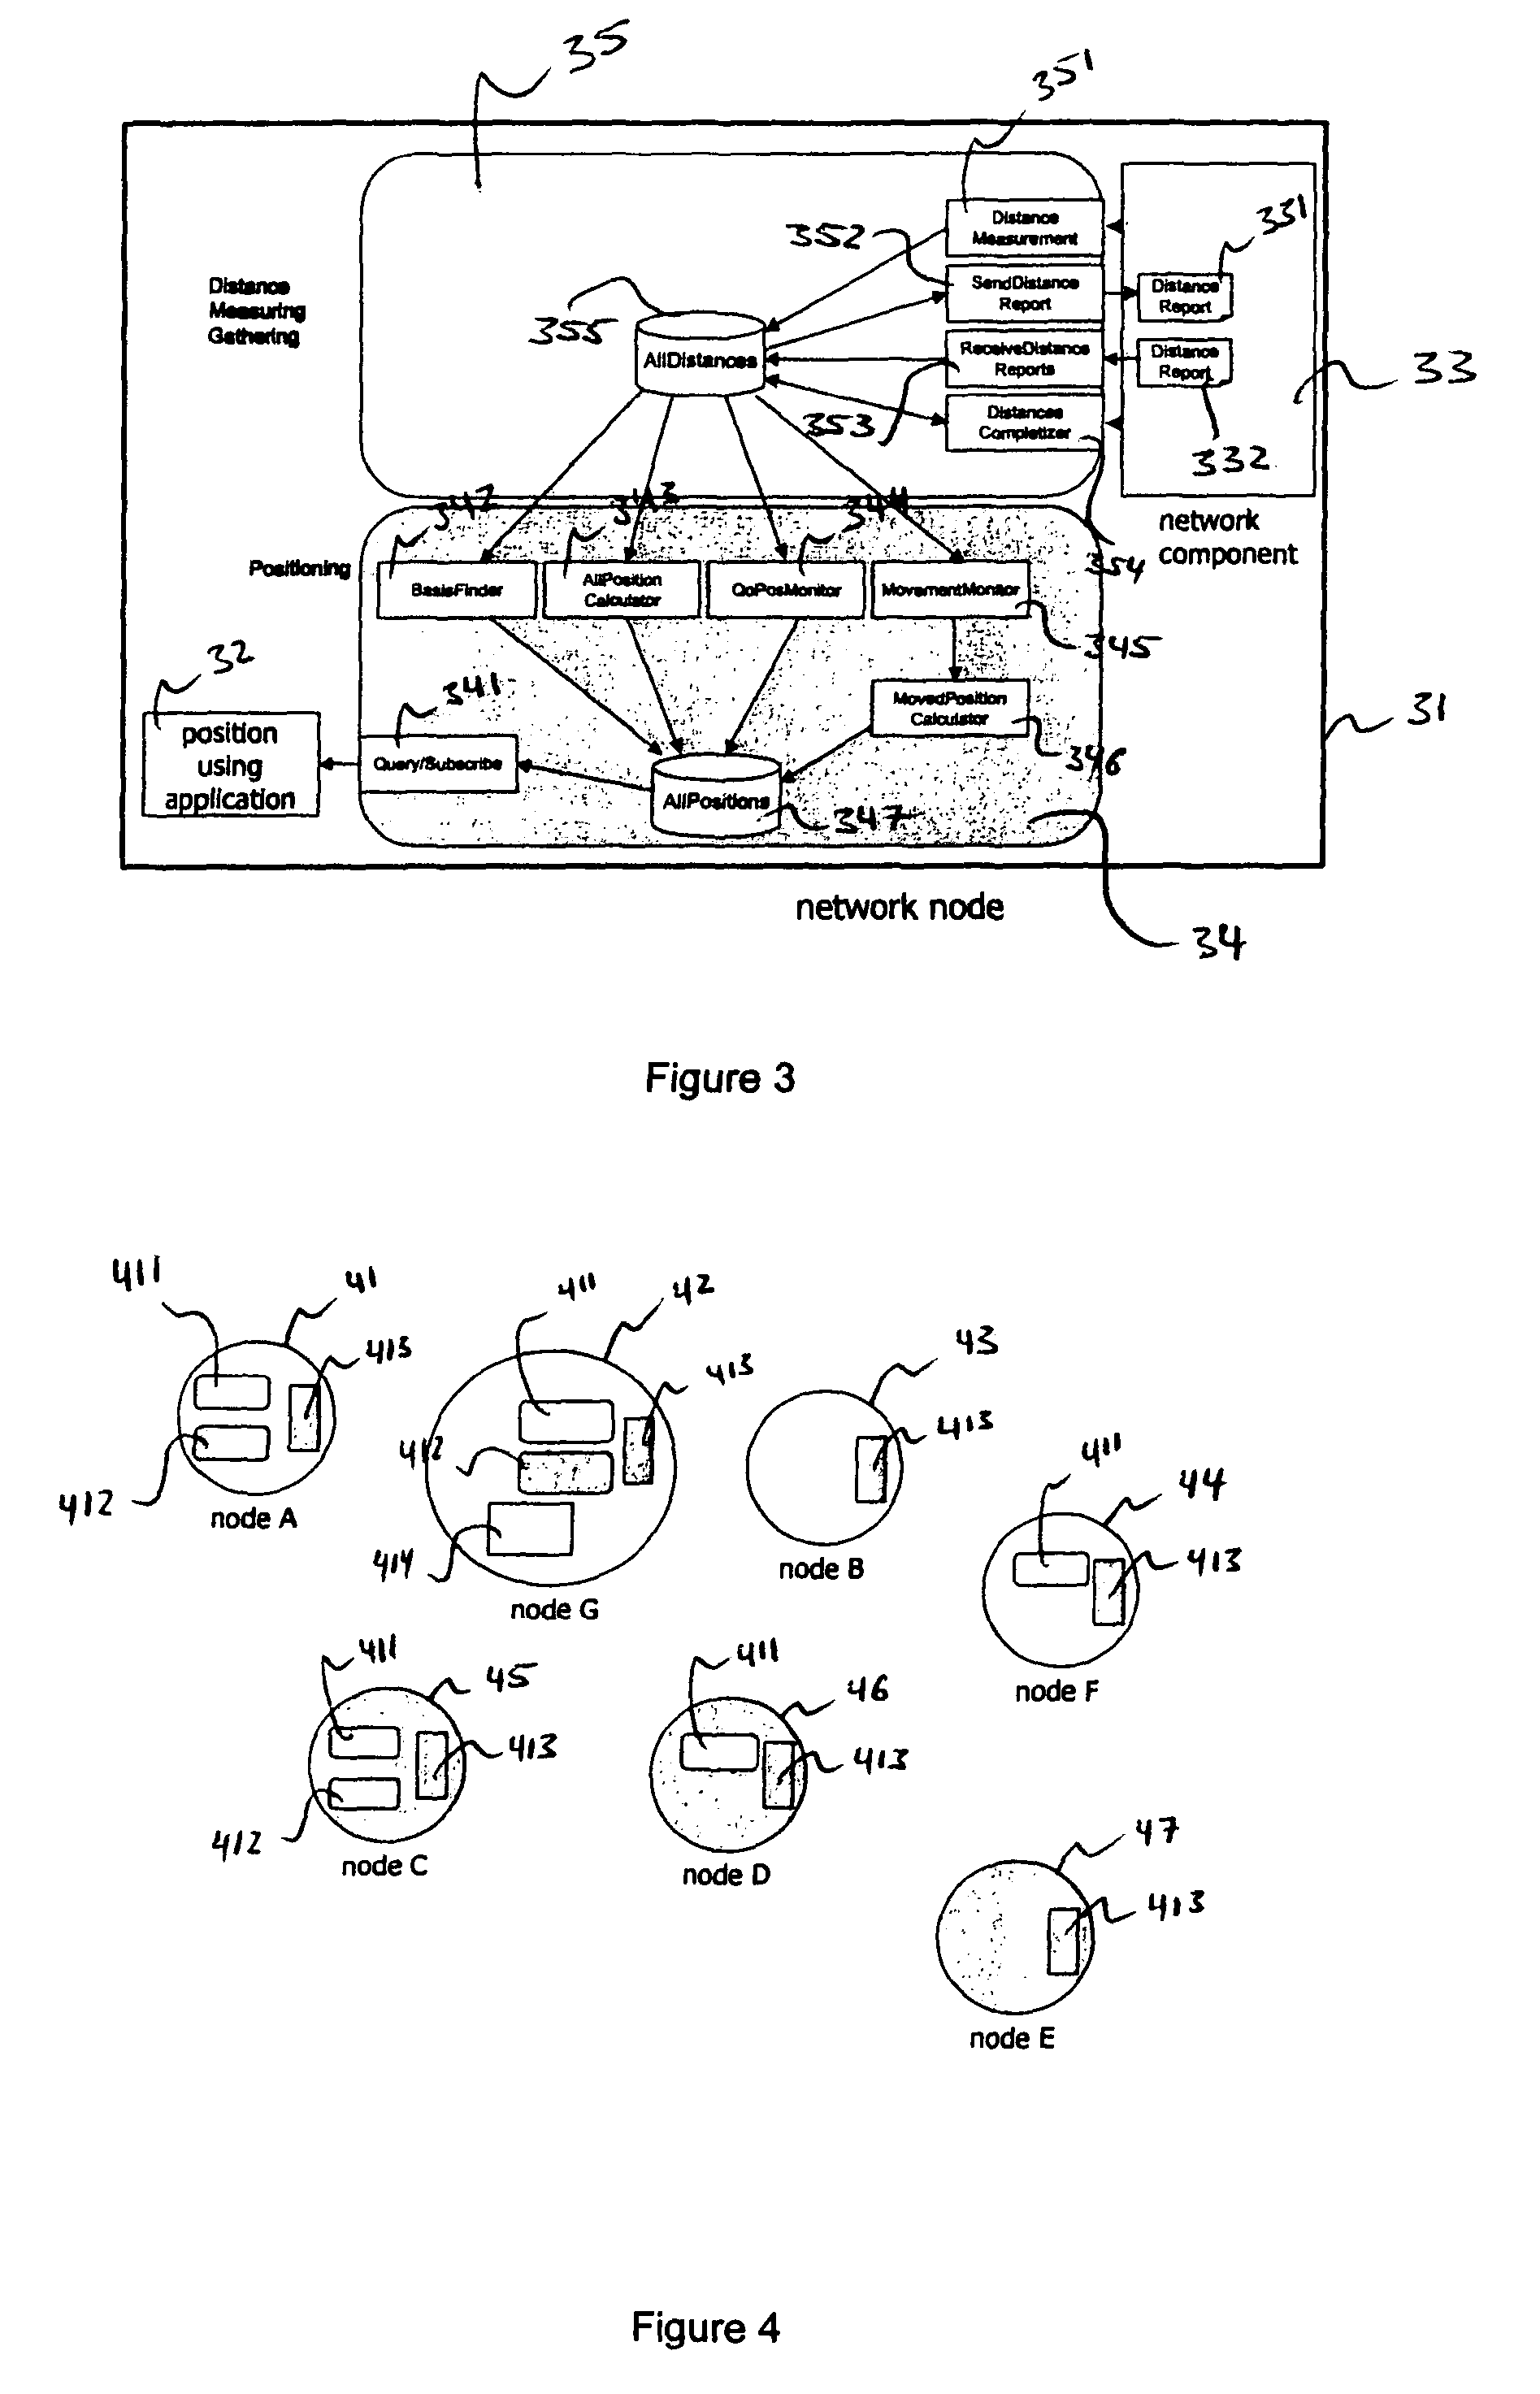 Relative 3D positioning in an ad-hoc network based on distances